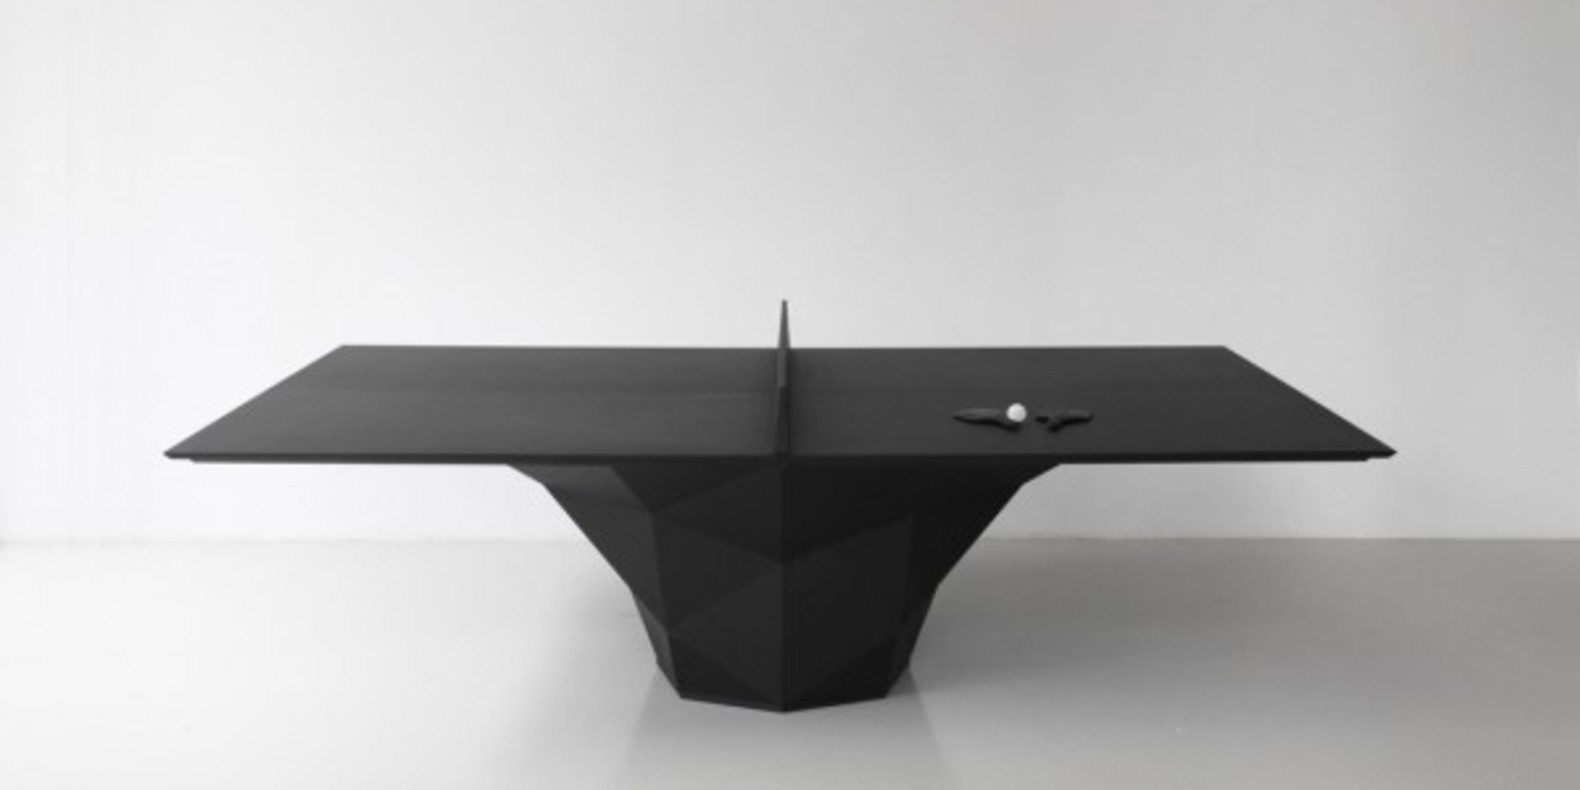 Ping pong table edition of 4 by janne kyttanen featured